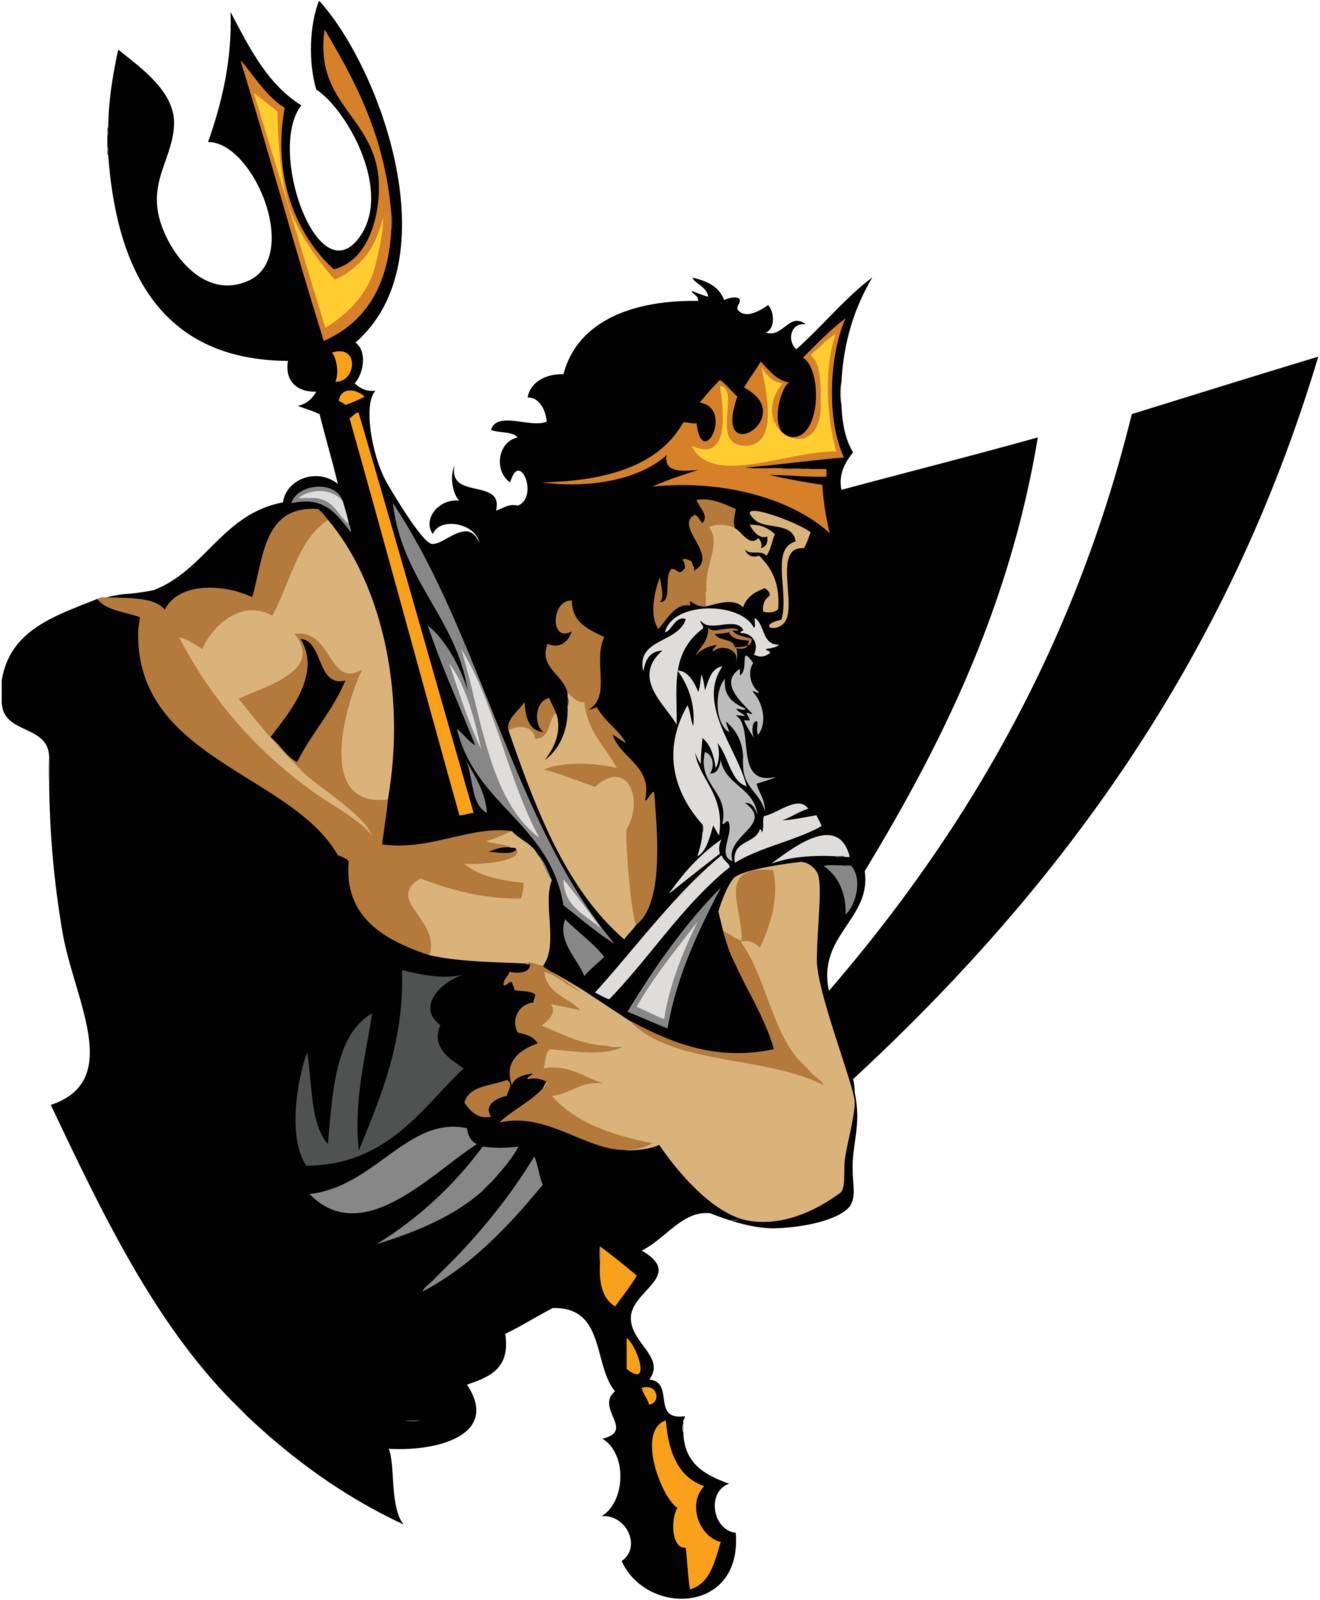 Titan Mascot with Trident and Crown Graphic Vector Illustration by chromaco